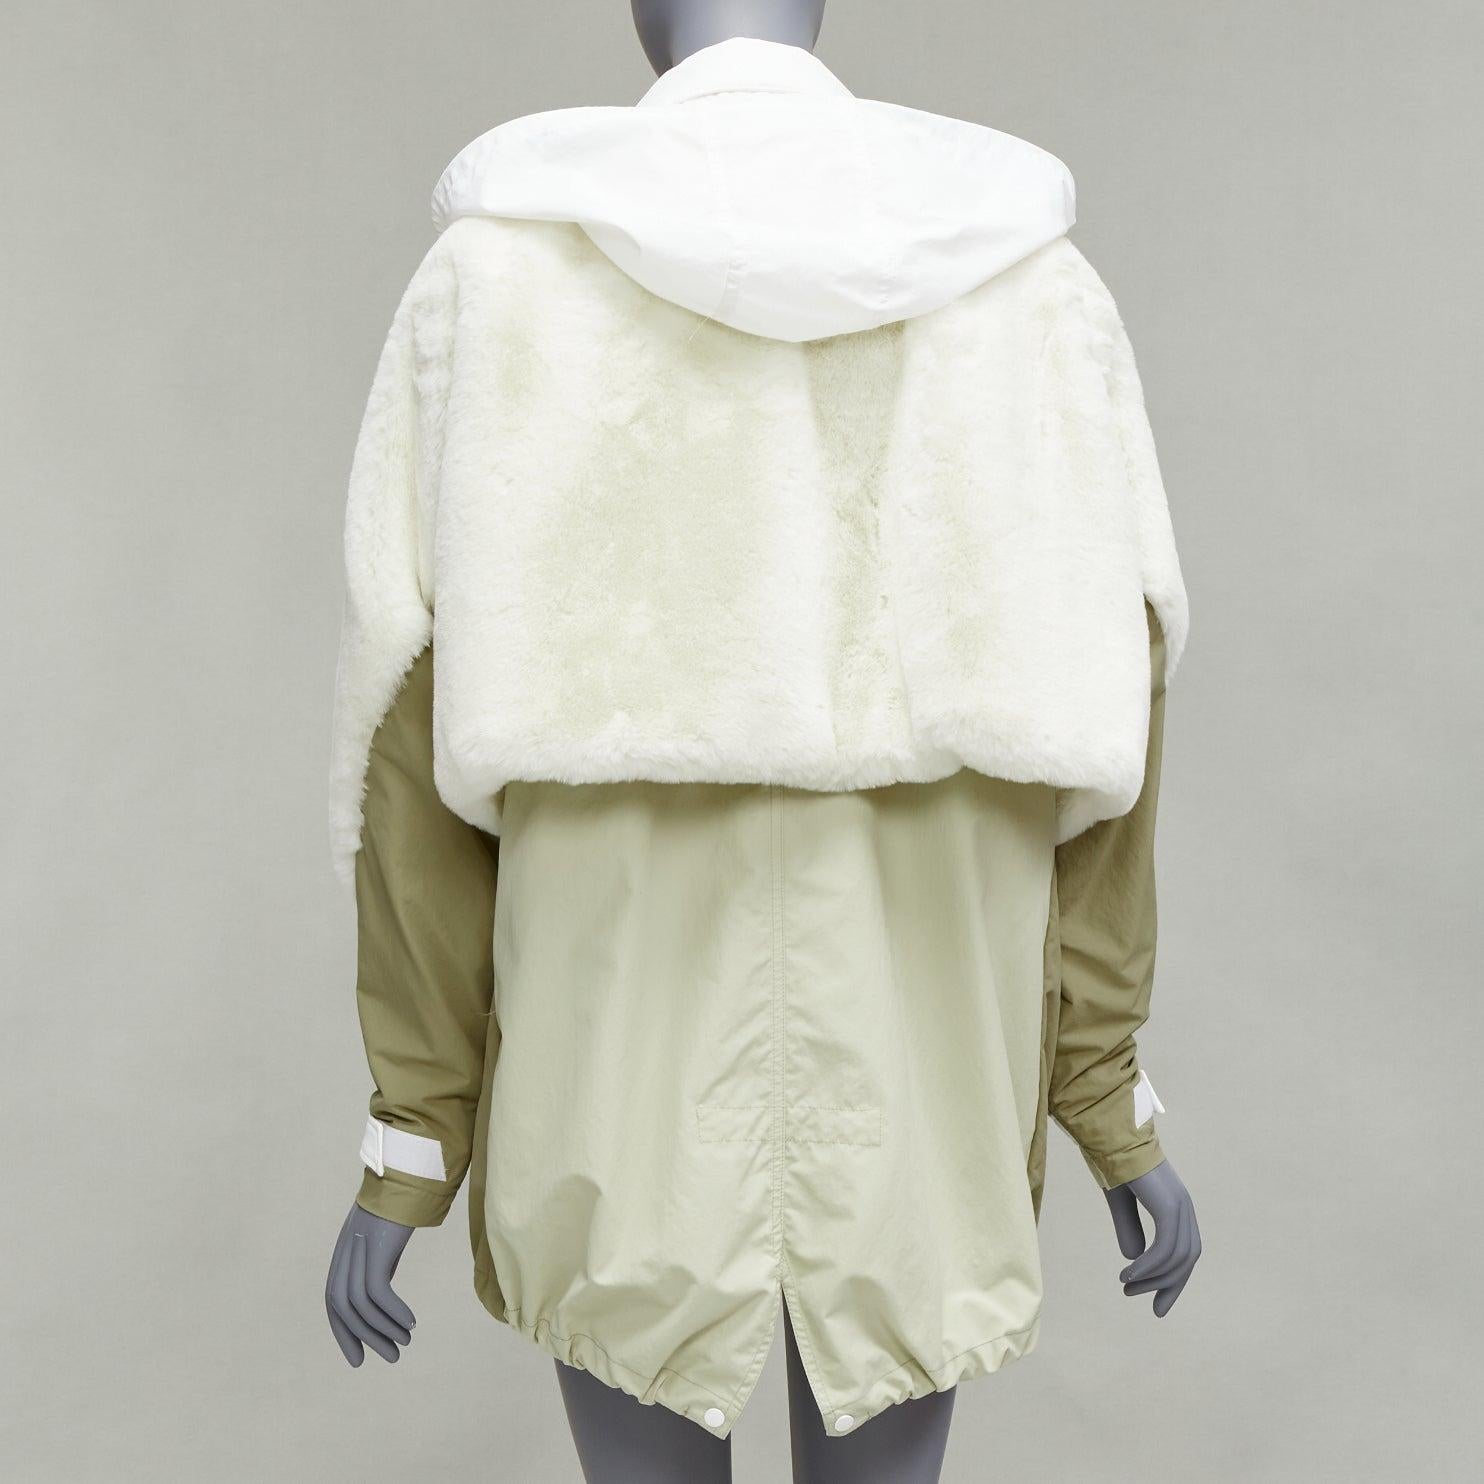 TOGA PULLA white nylon cream faux fur layered deconstructed parka jacket FR36 S For Sale 1